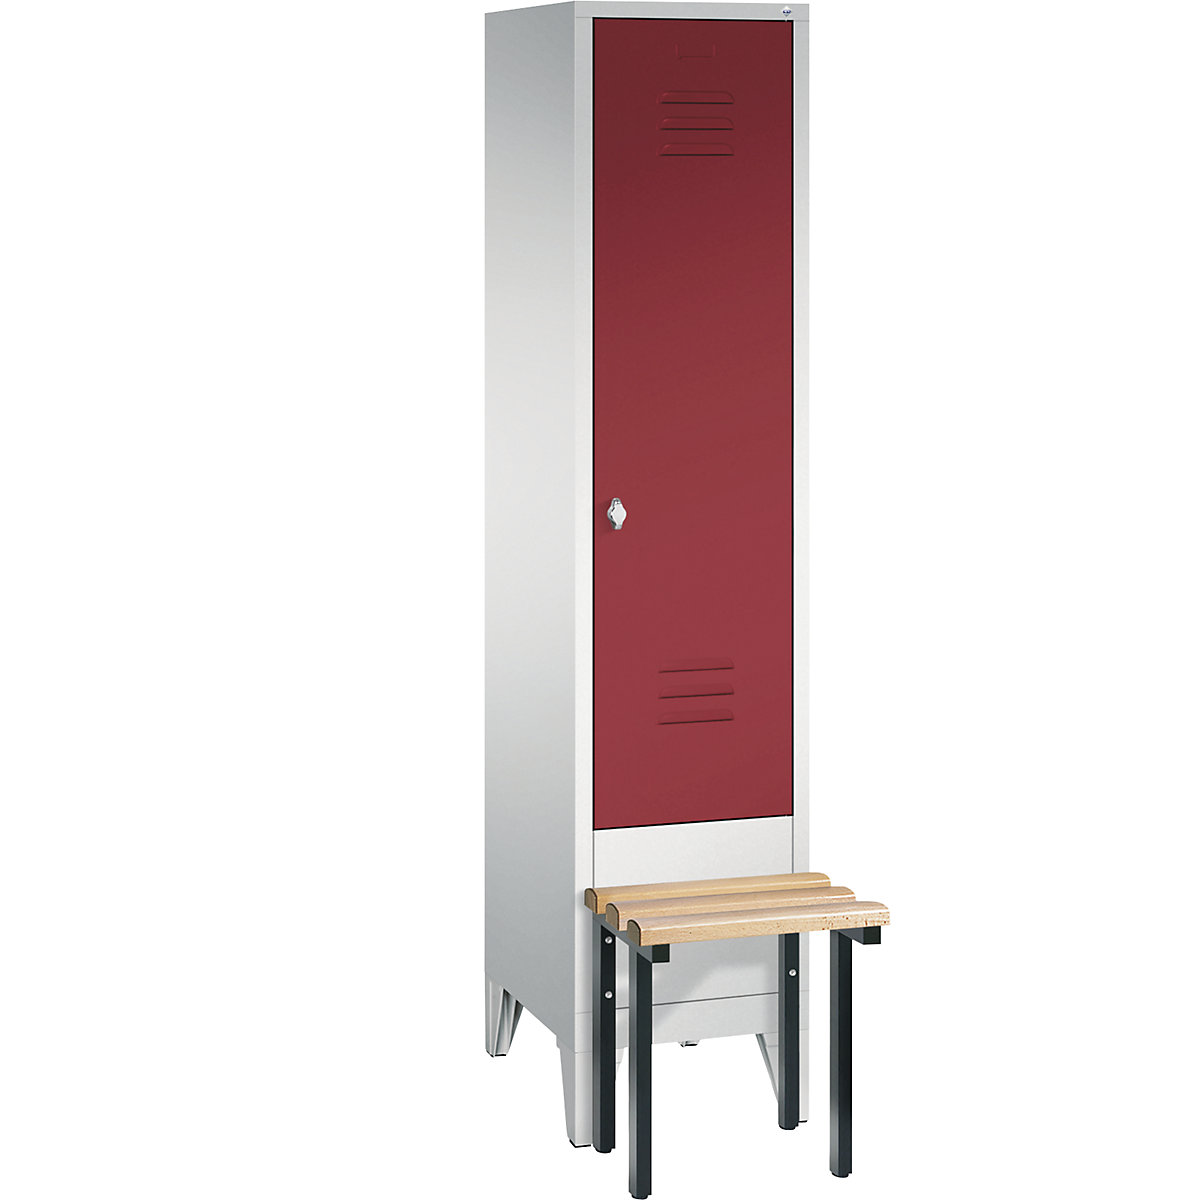 CLASSIC cloakroom locker with bench mounted in front – C+P, 1 compartment, compartment width 400 mm, light grey / ruby red-5